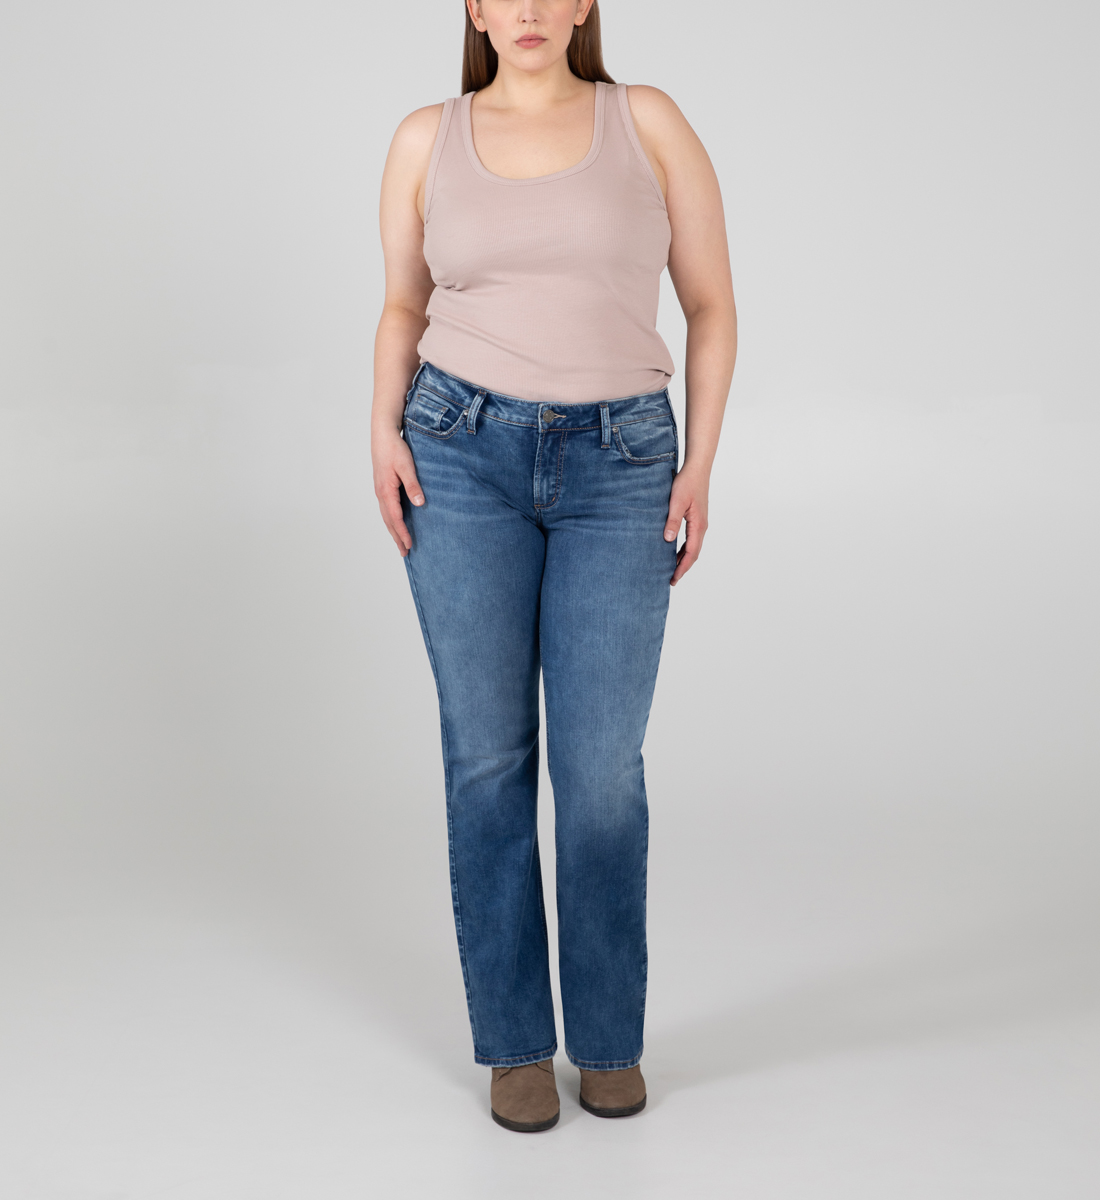 Silver Jeans Elyse Mid Rise Slim Bootcut Jeans Plus Size - Eco-Friendly Fabric